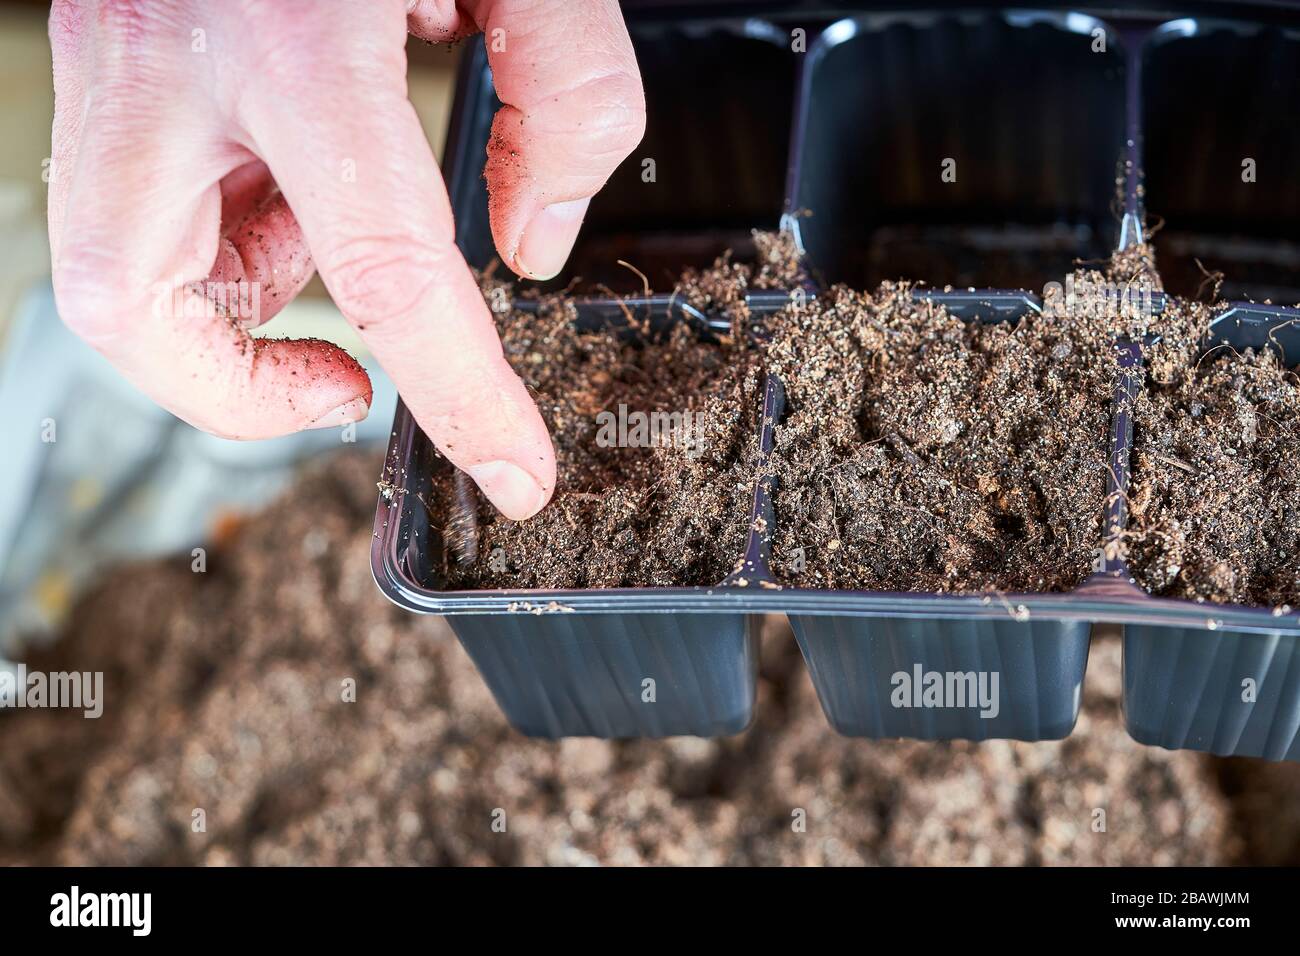 Filling small plastic compartments by hand with a soil in oder to plant some sees. Stock Photo